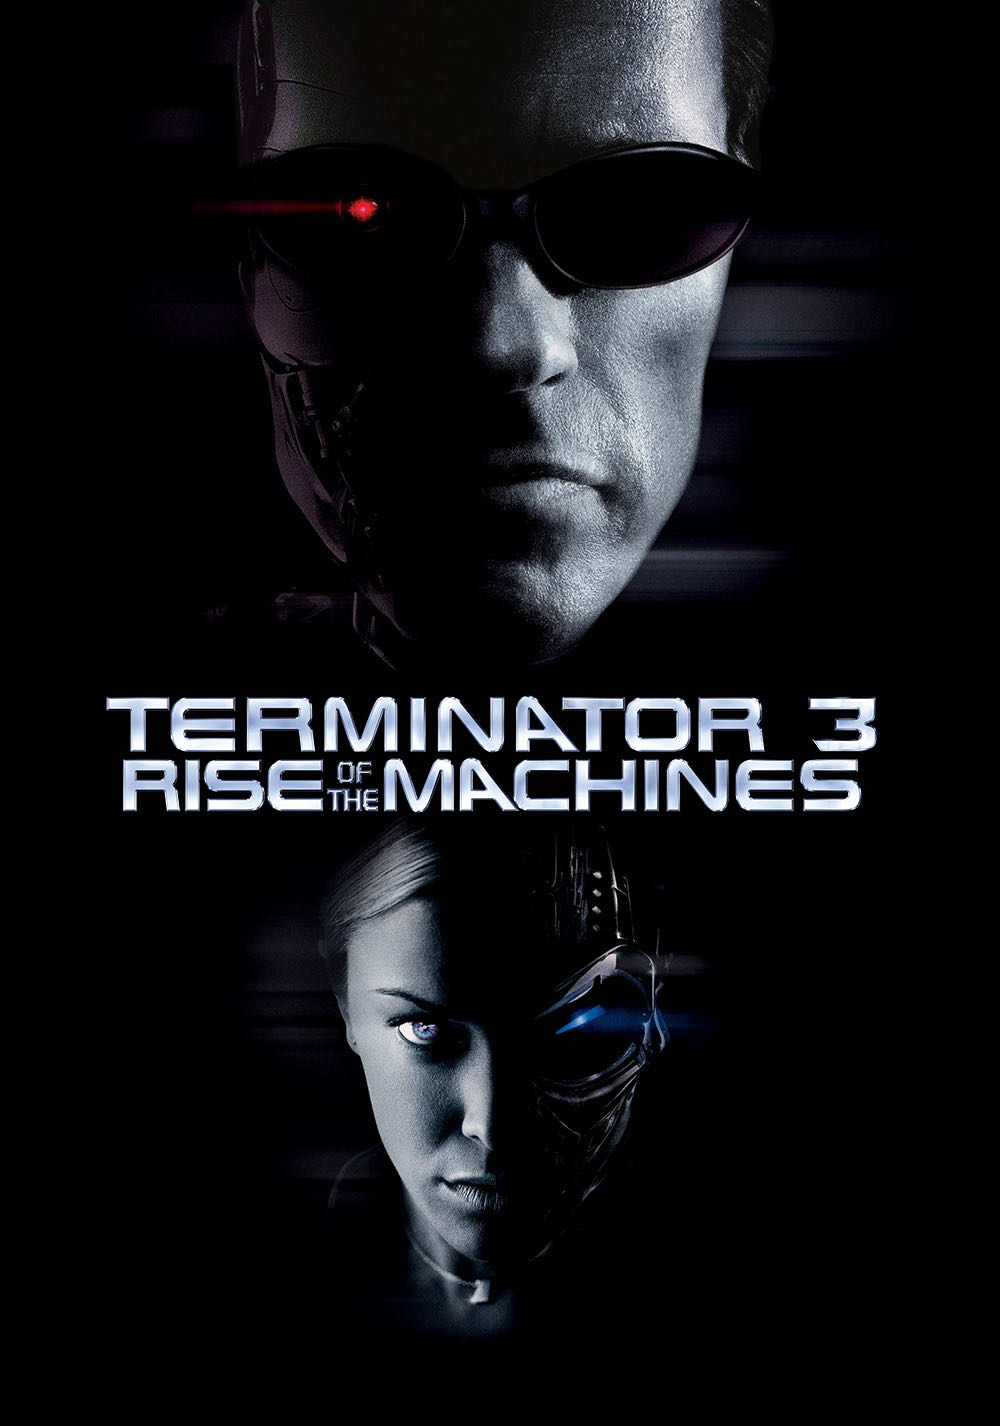 Terminator 3: Rise of the Machines Blu-ray movie collectible [Barcode 883929016938] - Main Image 3